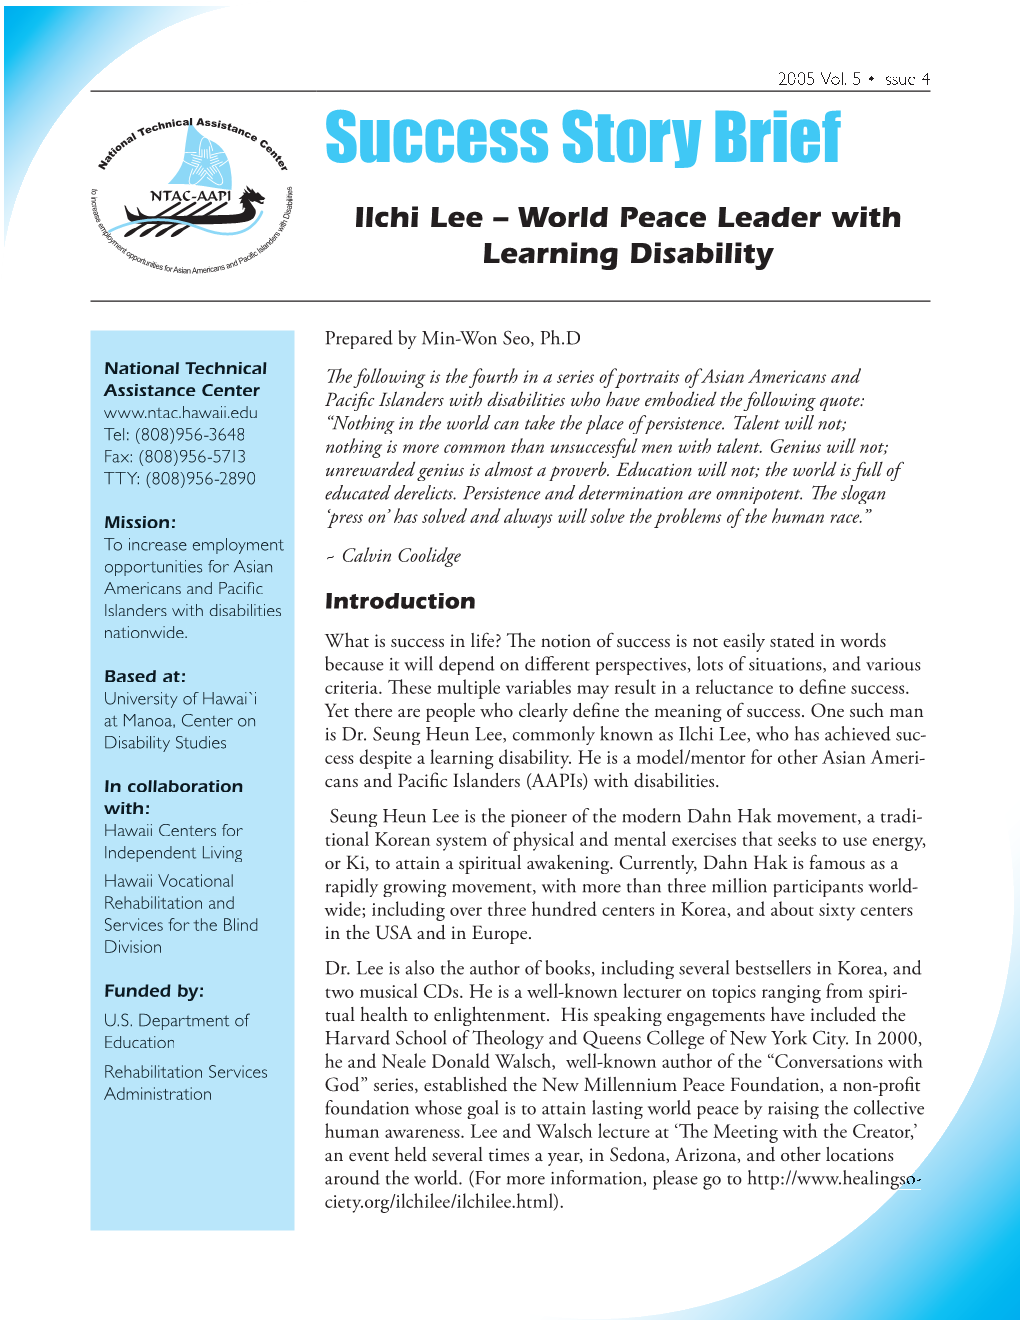 Ilchi Lee – World Peace Leader with Learning Disability